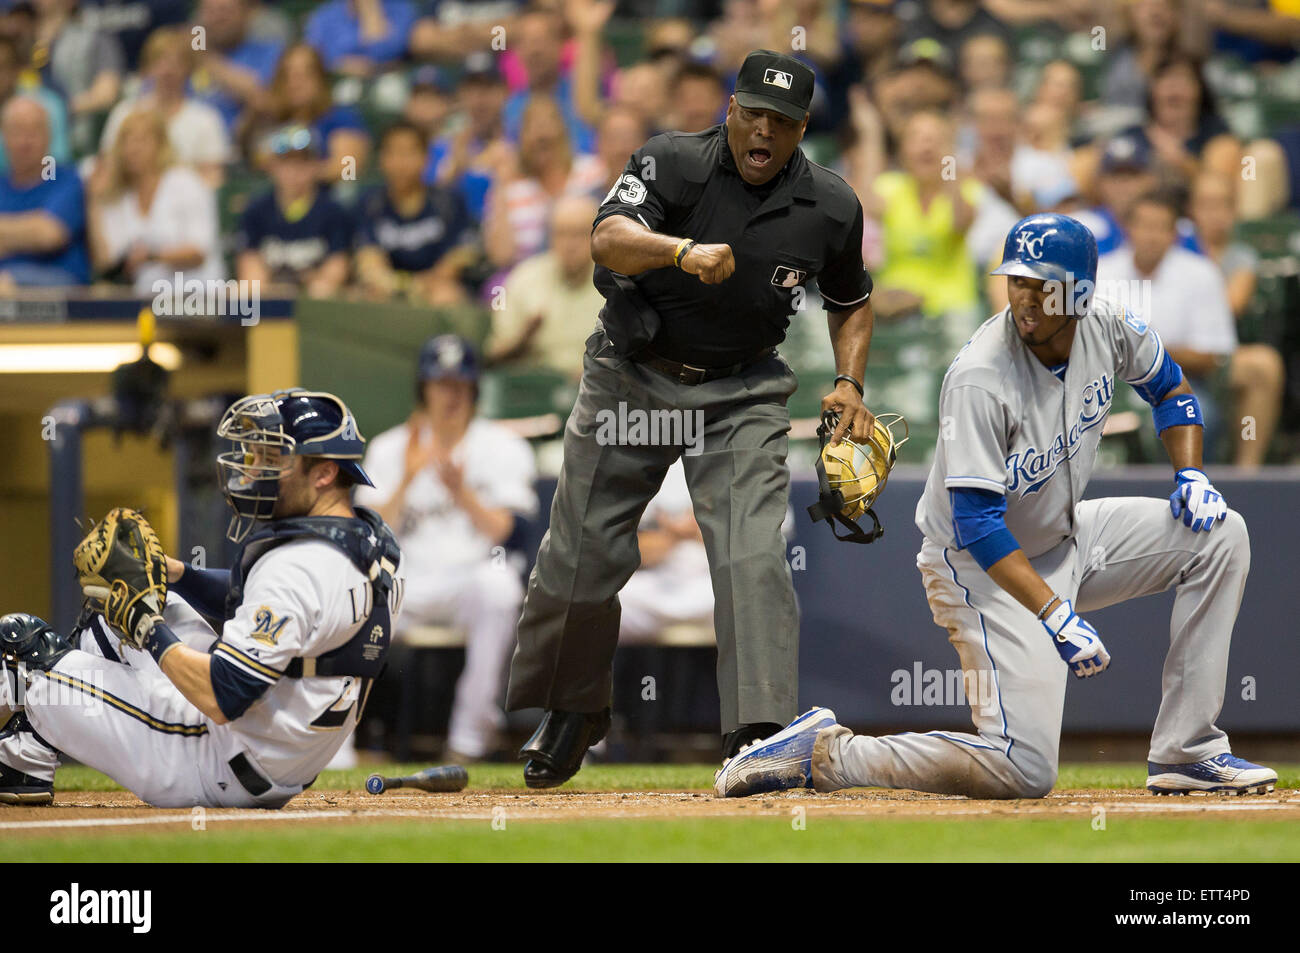 Milwaukee, Wisconsin, USA. 15th June, 2015. Kansas City Royals shortstop Alcides Escobar #2 is first called out by home plate umpire Laz Diaz. After a replay challenge Escobar was called safe during the Major League Baseball game between the Milwaukee Brewers and the Kansas City Royals at Miller Park in Milwaukee, WI. John Fisher/CSM/Alamy Live News Stock Photo